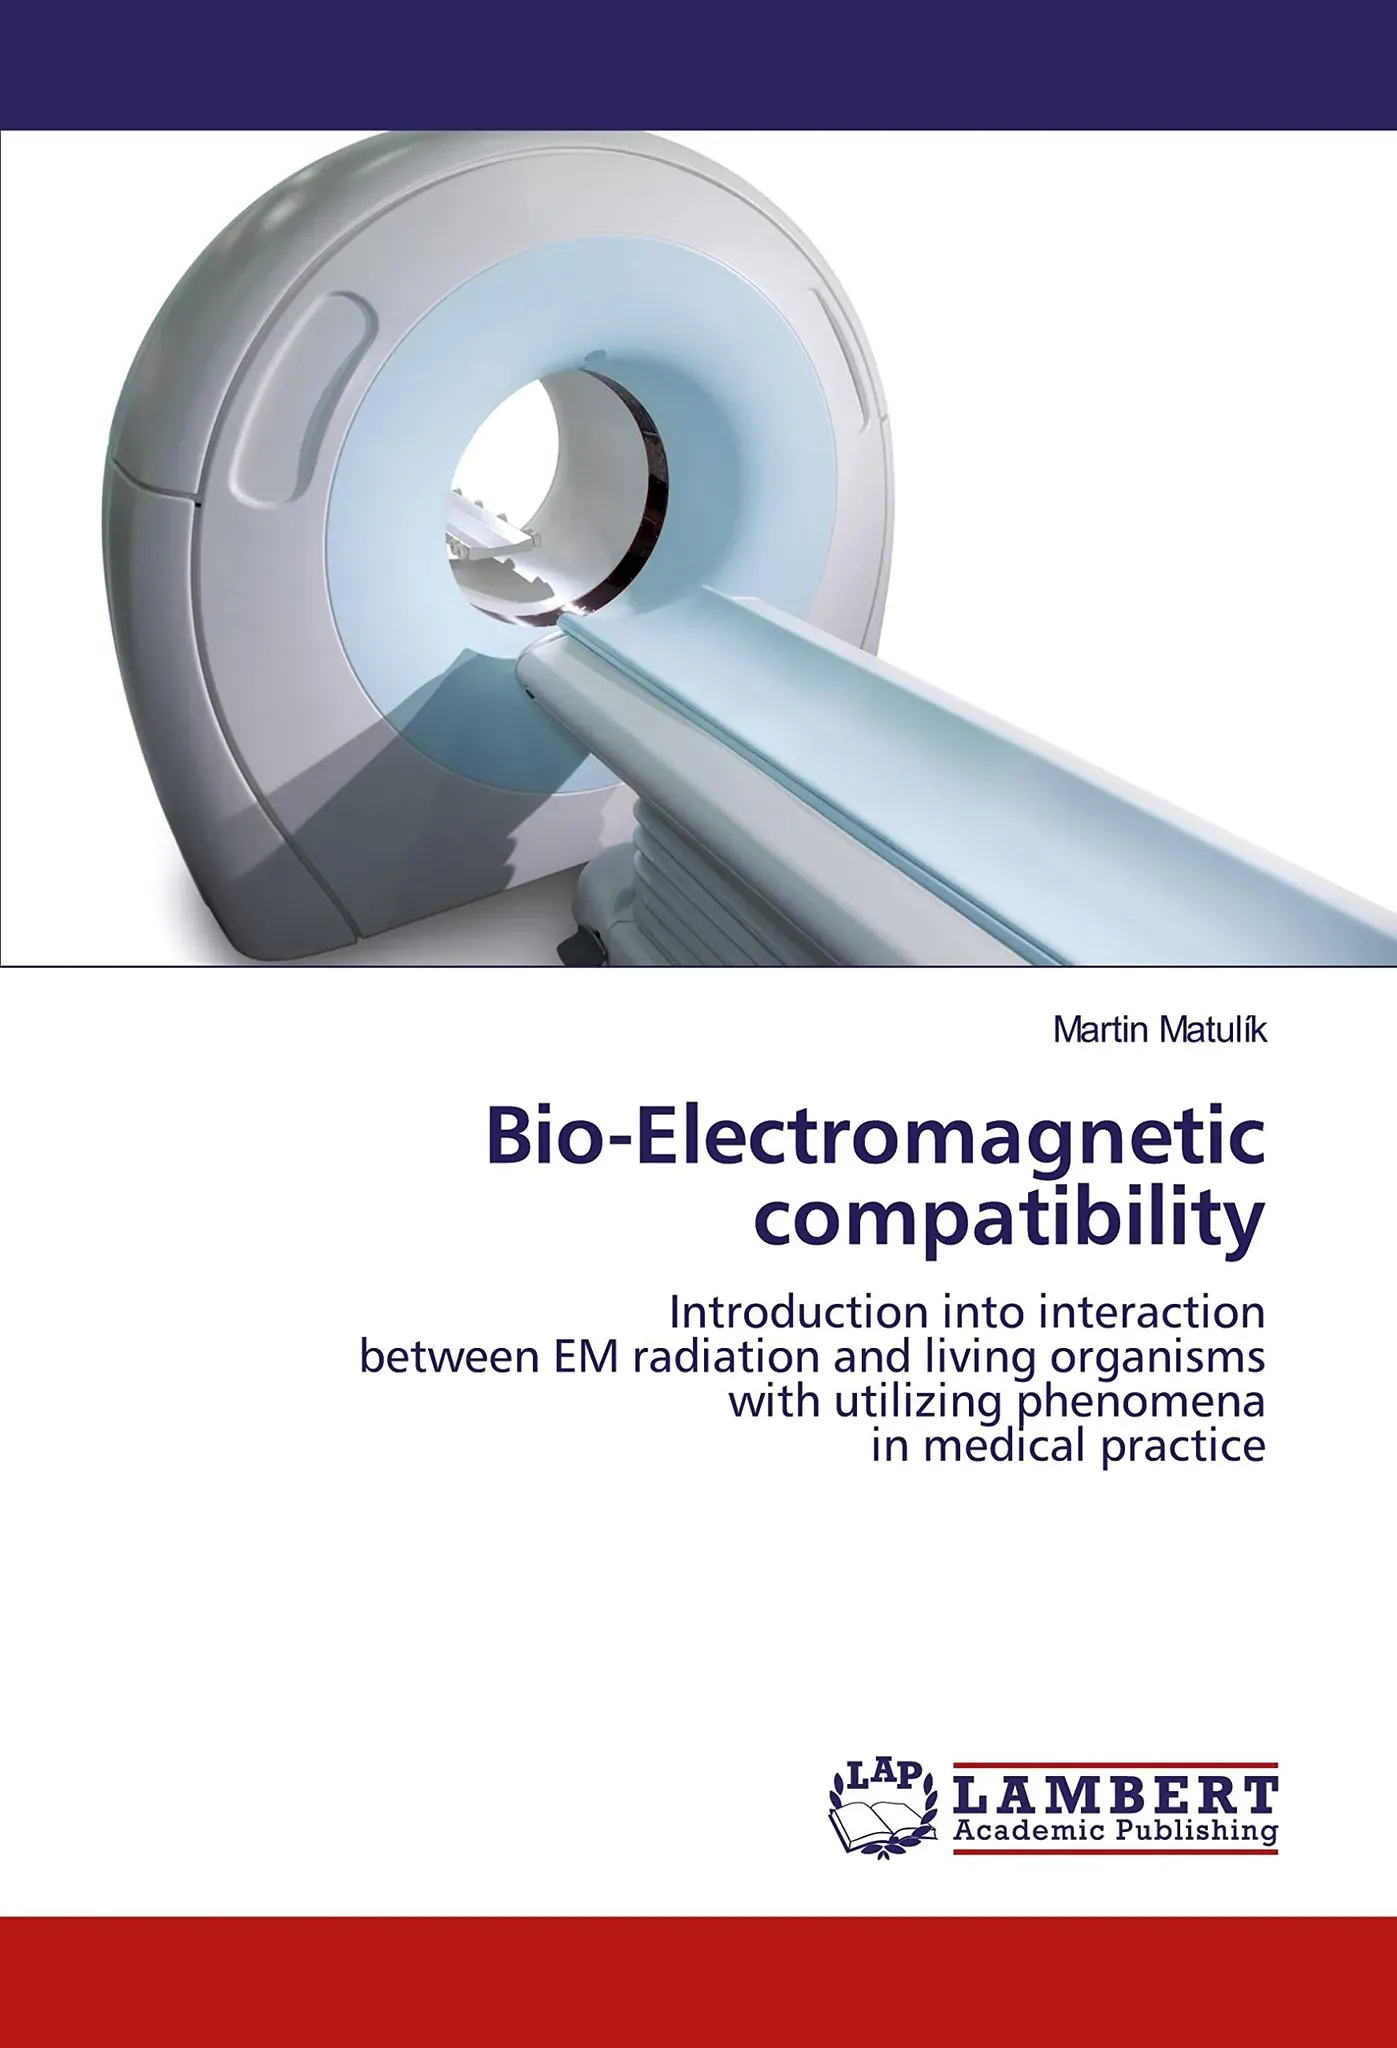 Bio-Electromagnetic compatibility: Introduction into interaction between EM radiation and living organisms with utilizing phenomena in medical practice